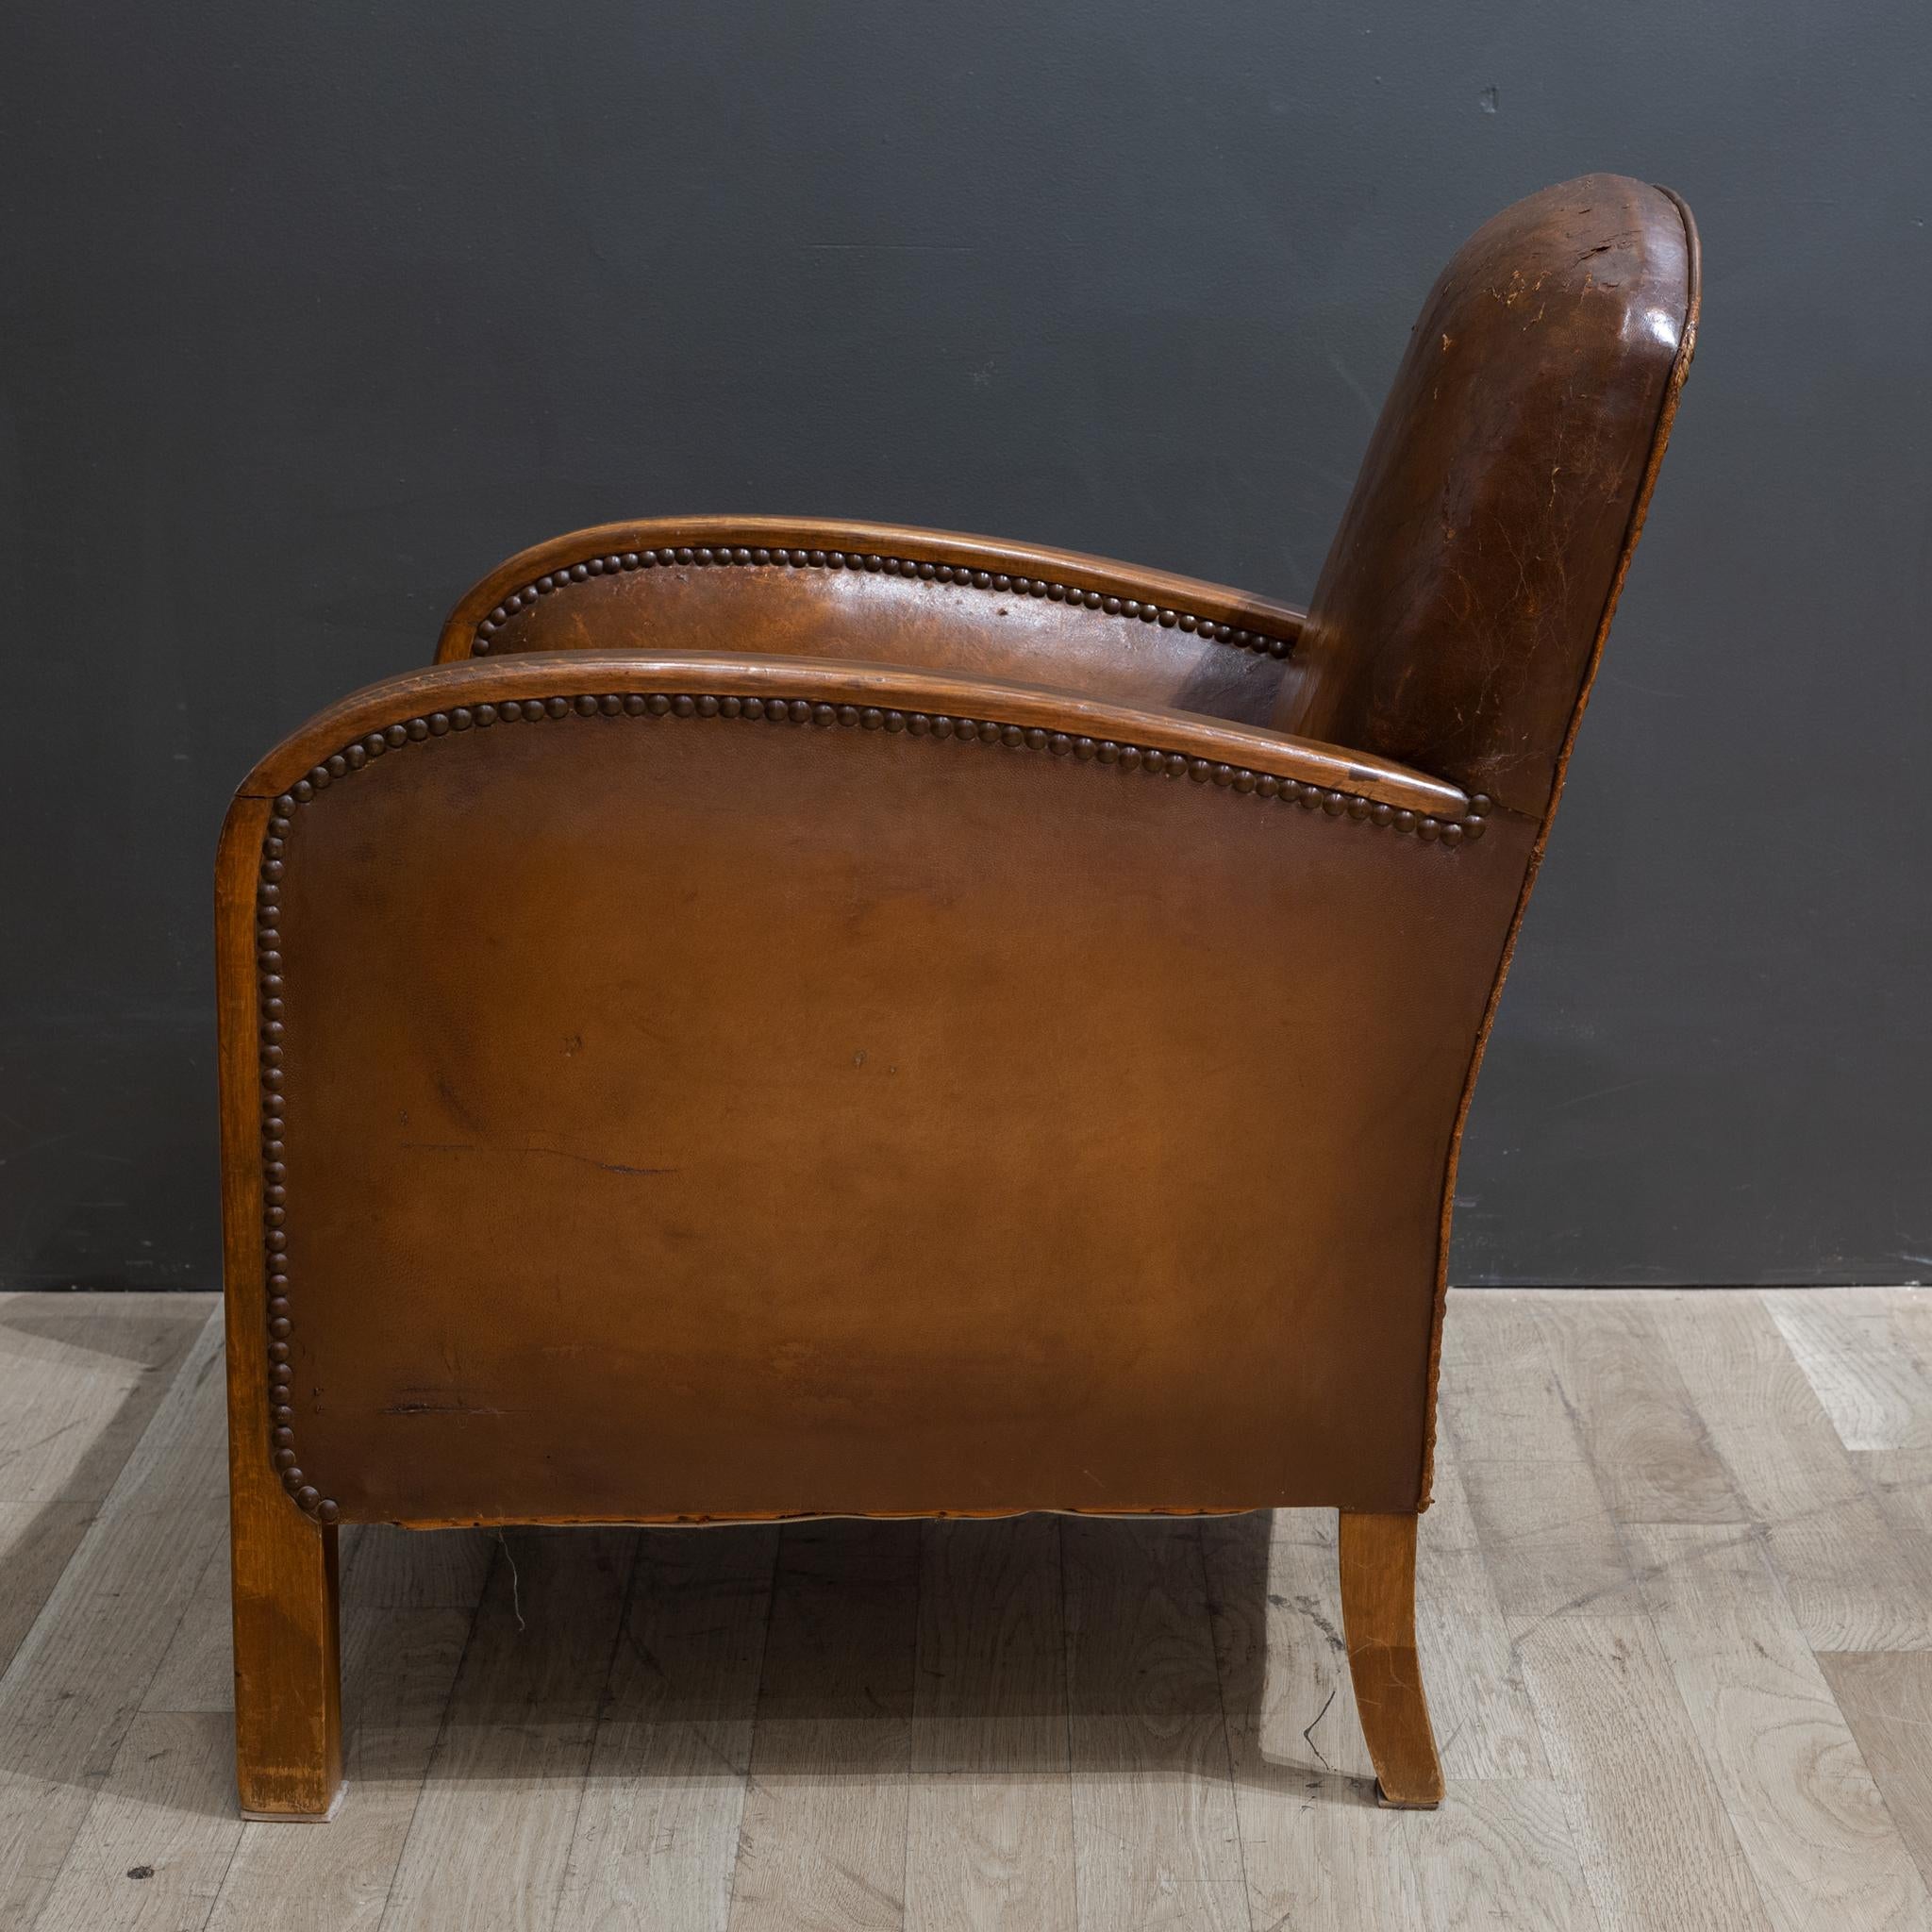 20th Century Early 20th c. French Library Club Chair c.1930-1940